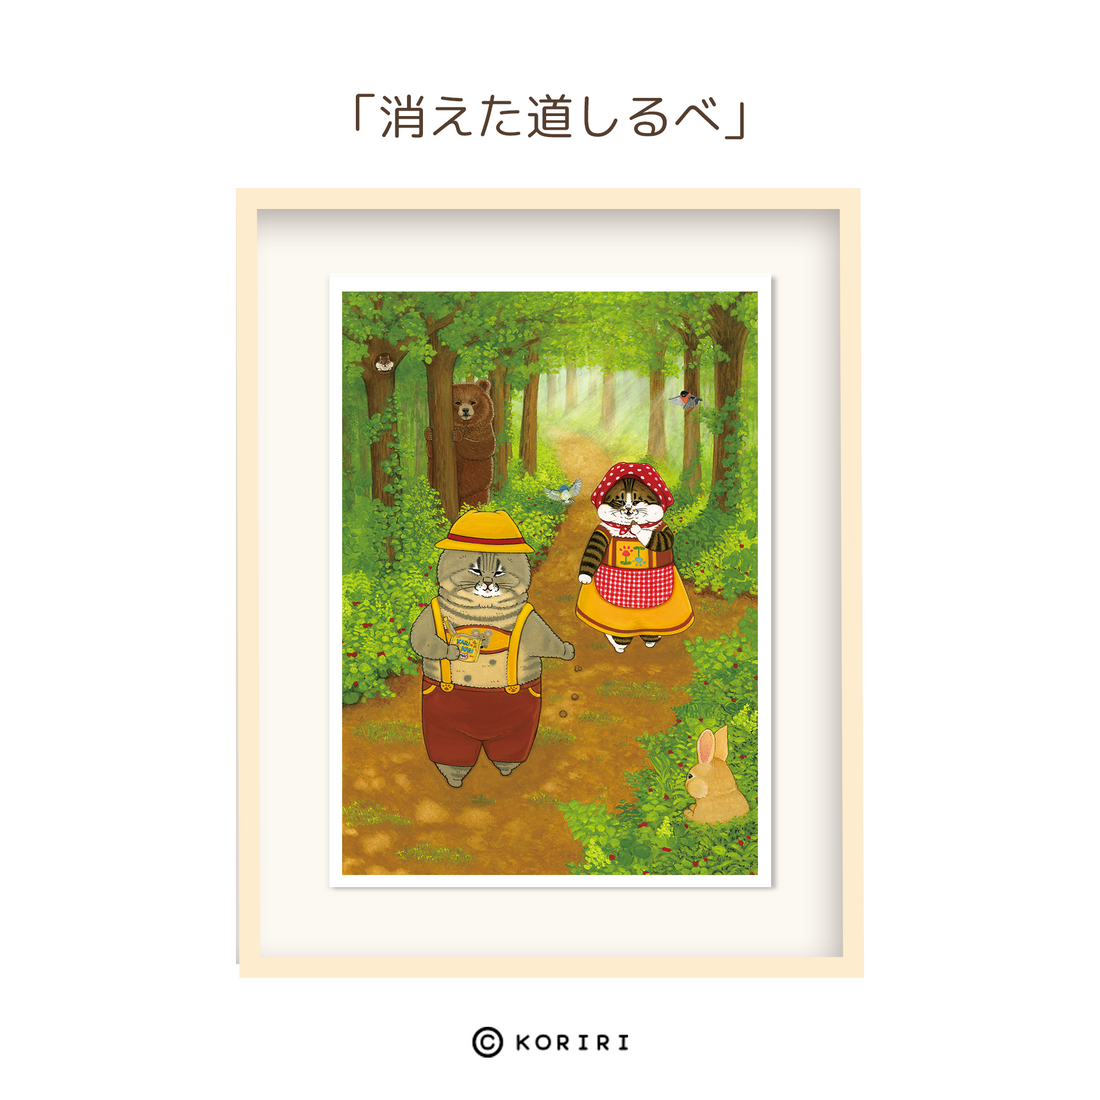 [Reservation sale] Cat world that is mysterious in the world duplicate original picture "disappeared road sign"